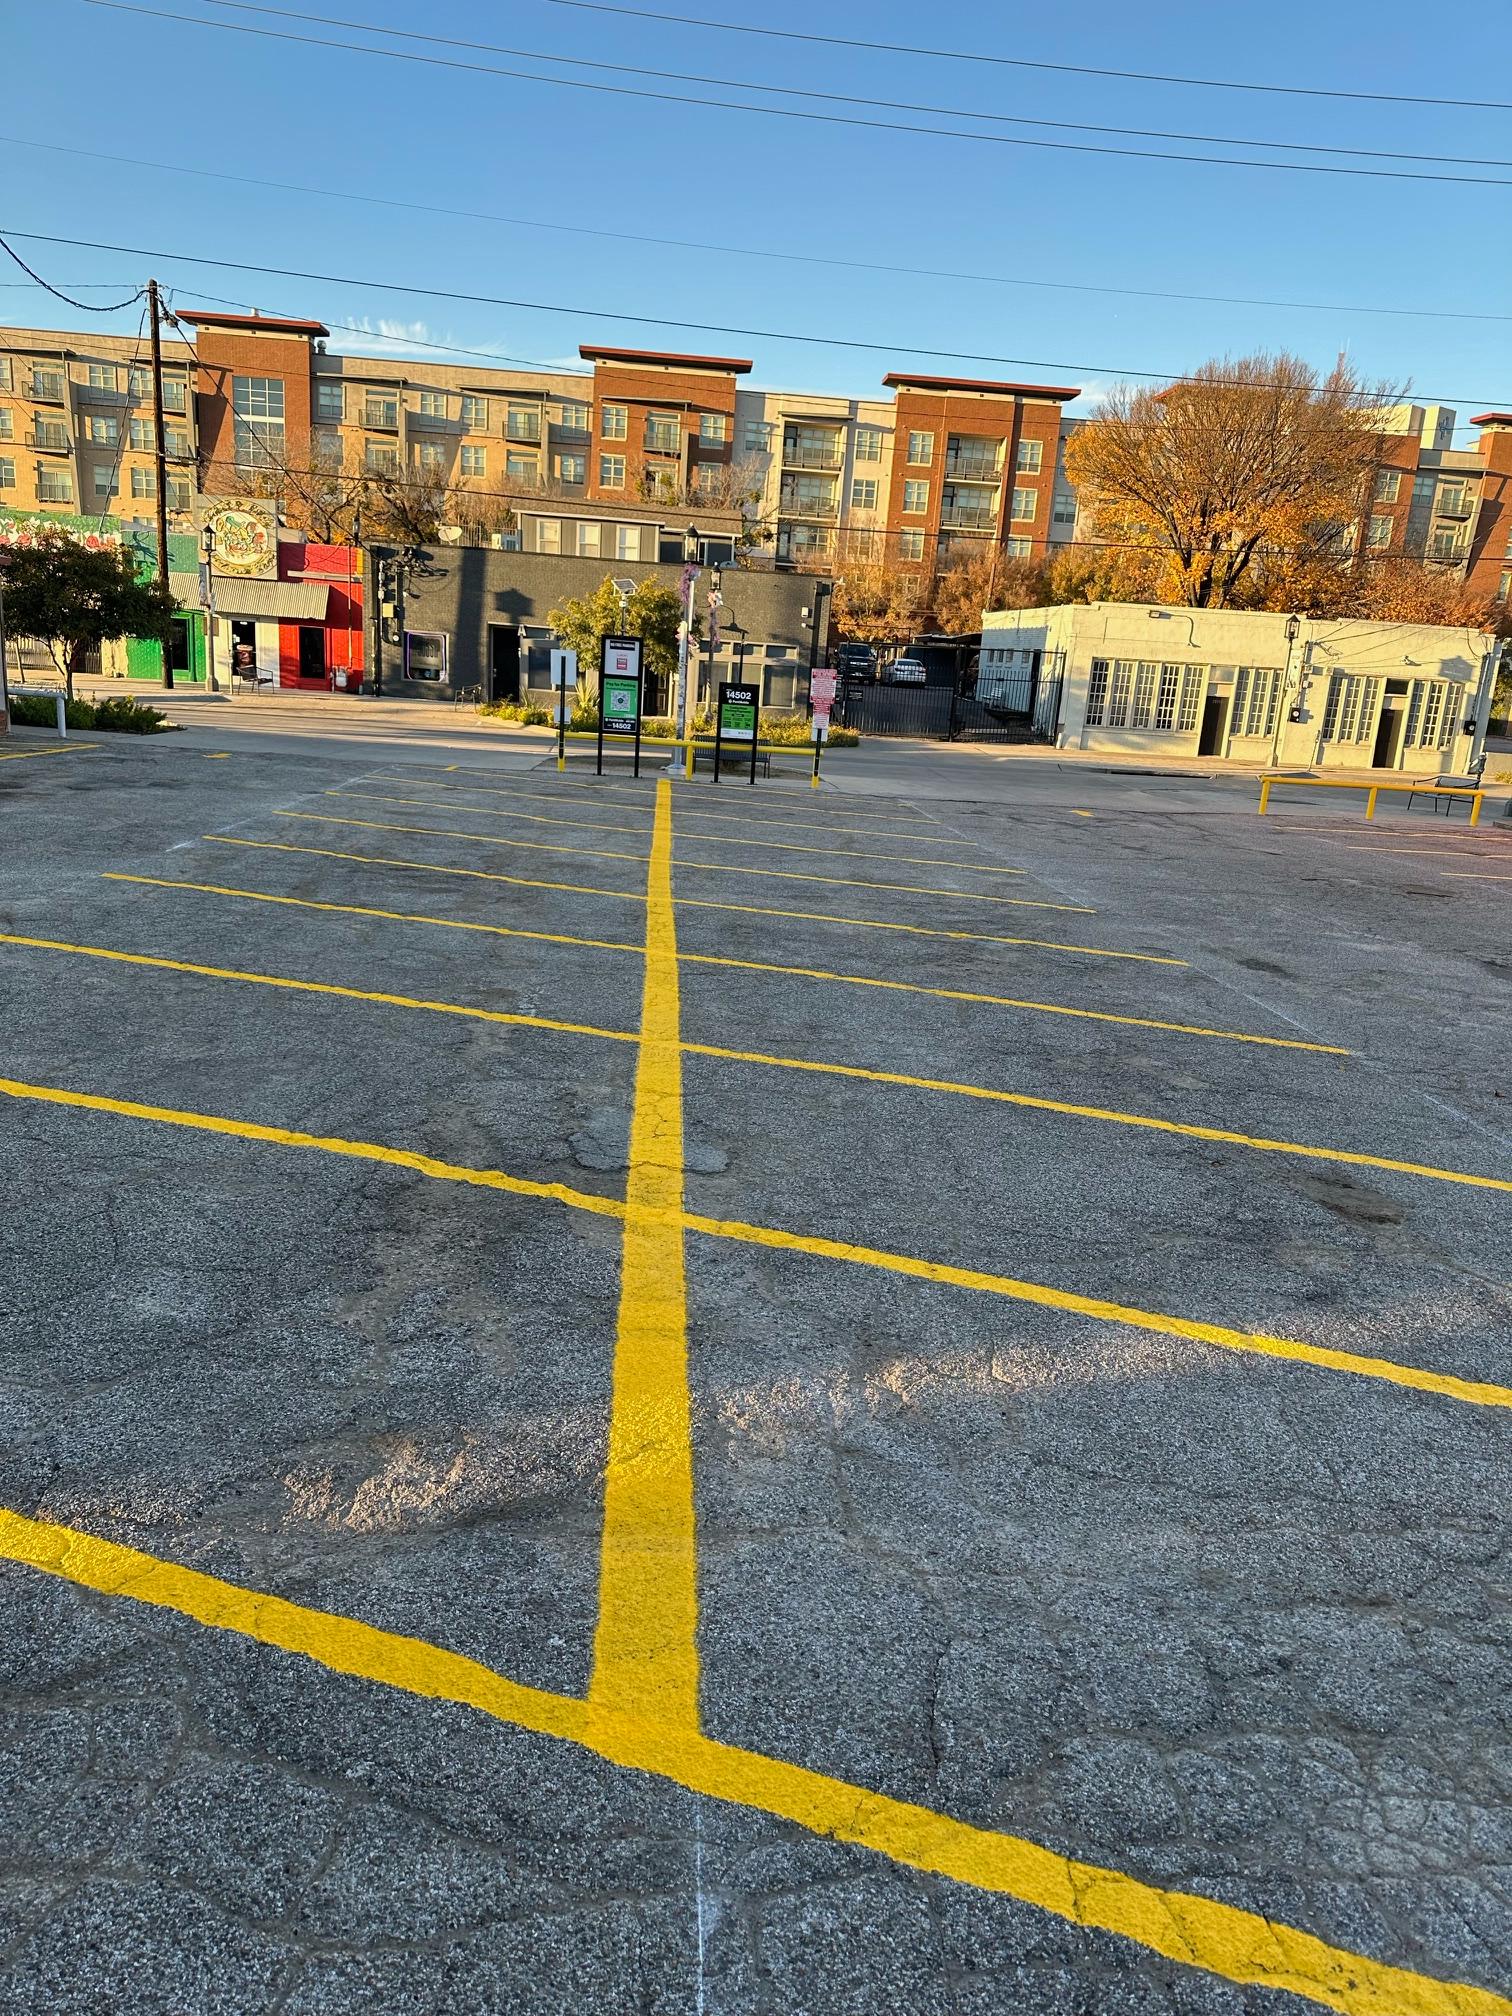 completed parking lot striping by tiger stripes